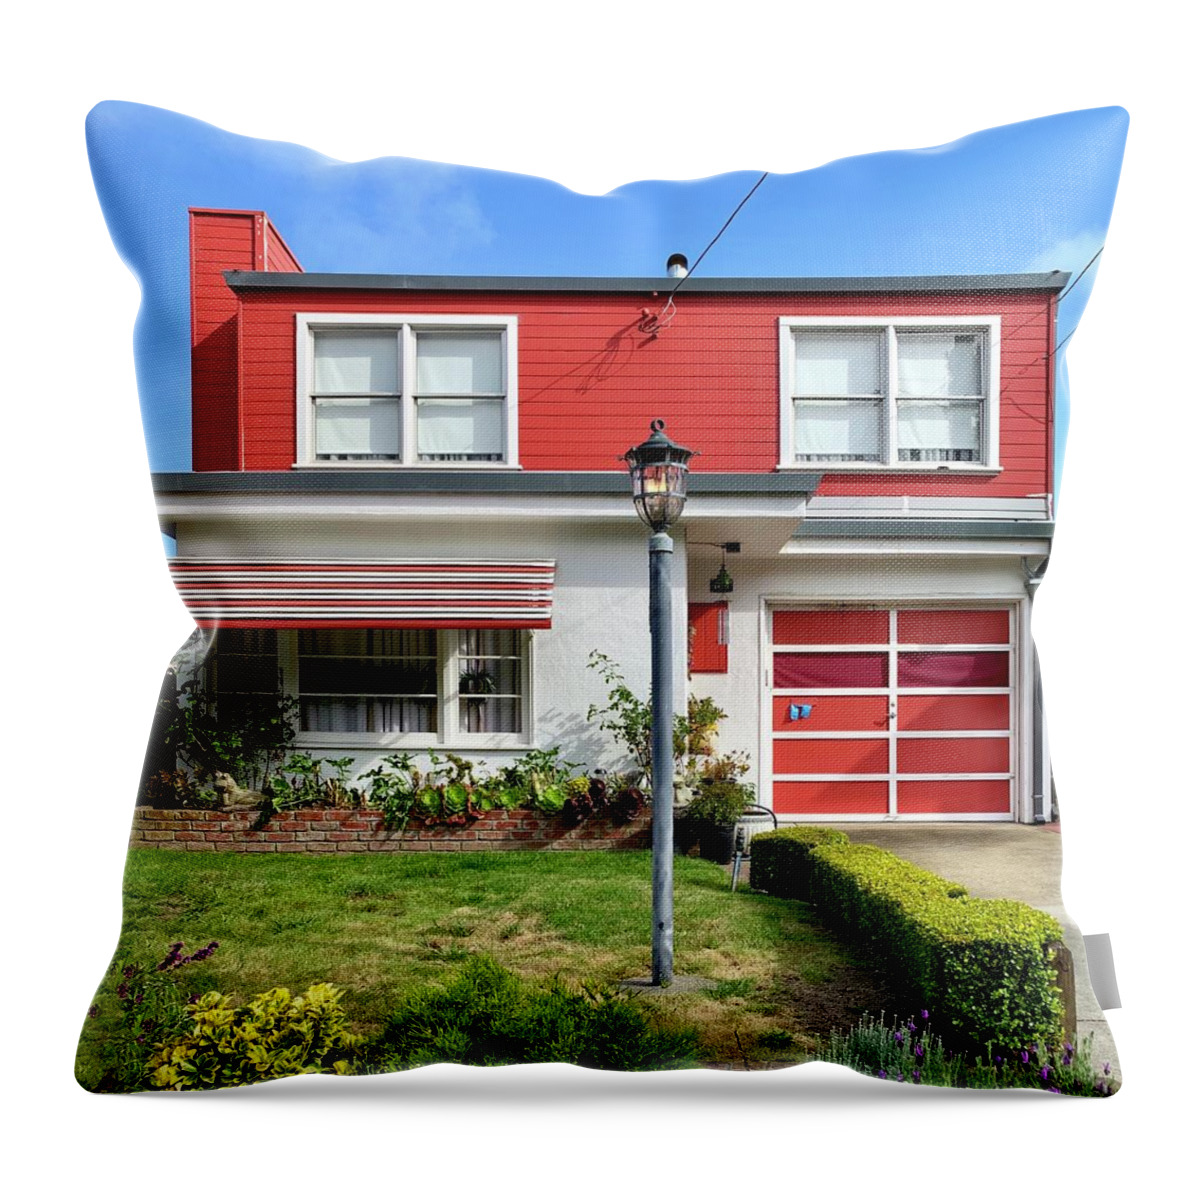  Throw Pillow featuring the photograph Red And White House by Julie Gebhardt